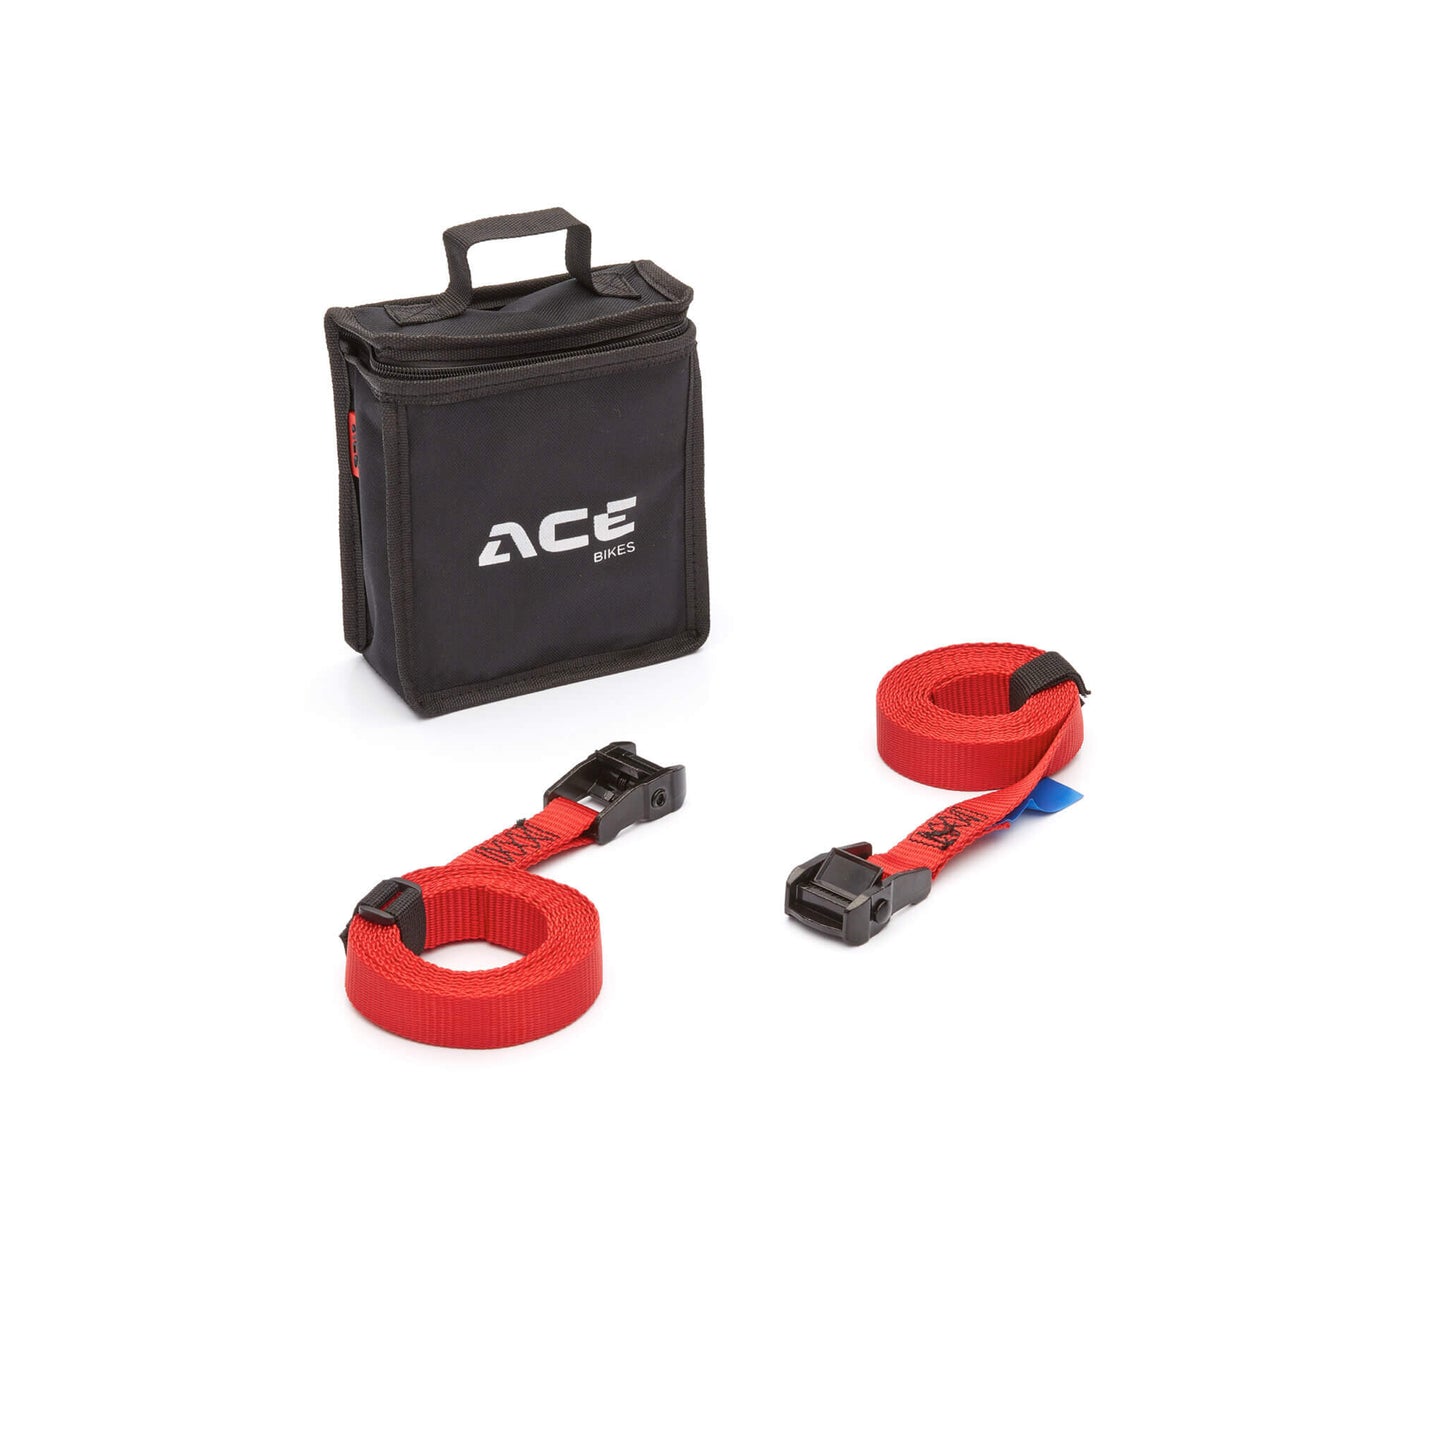 Acebikes Cam Buckle Essential 2-pack